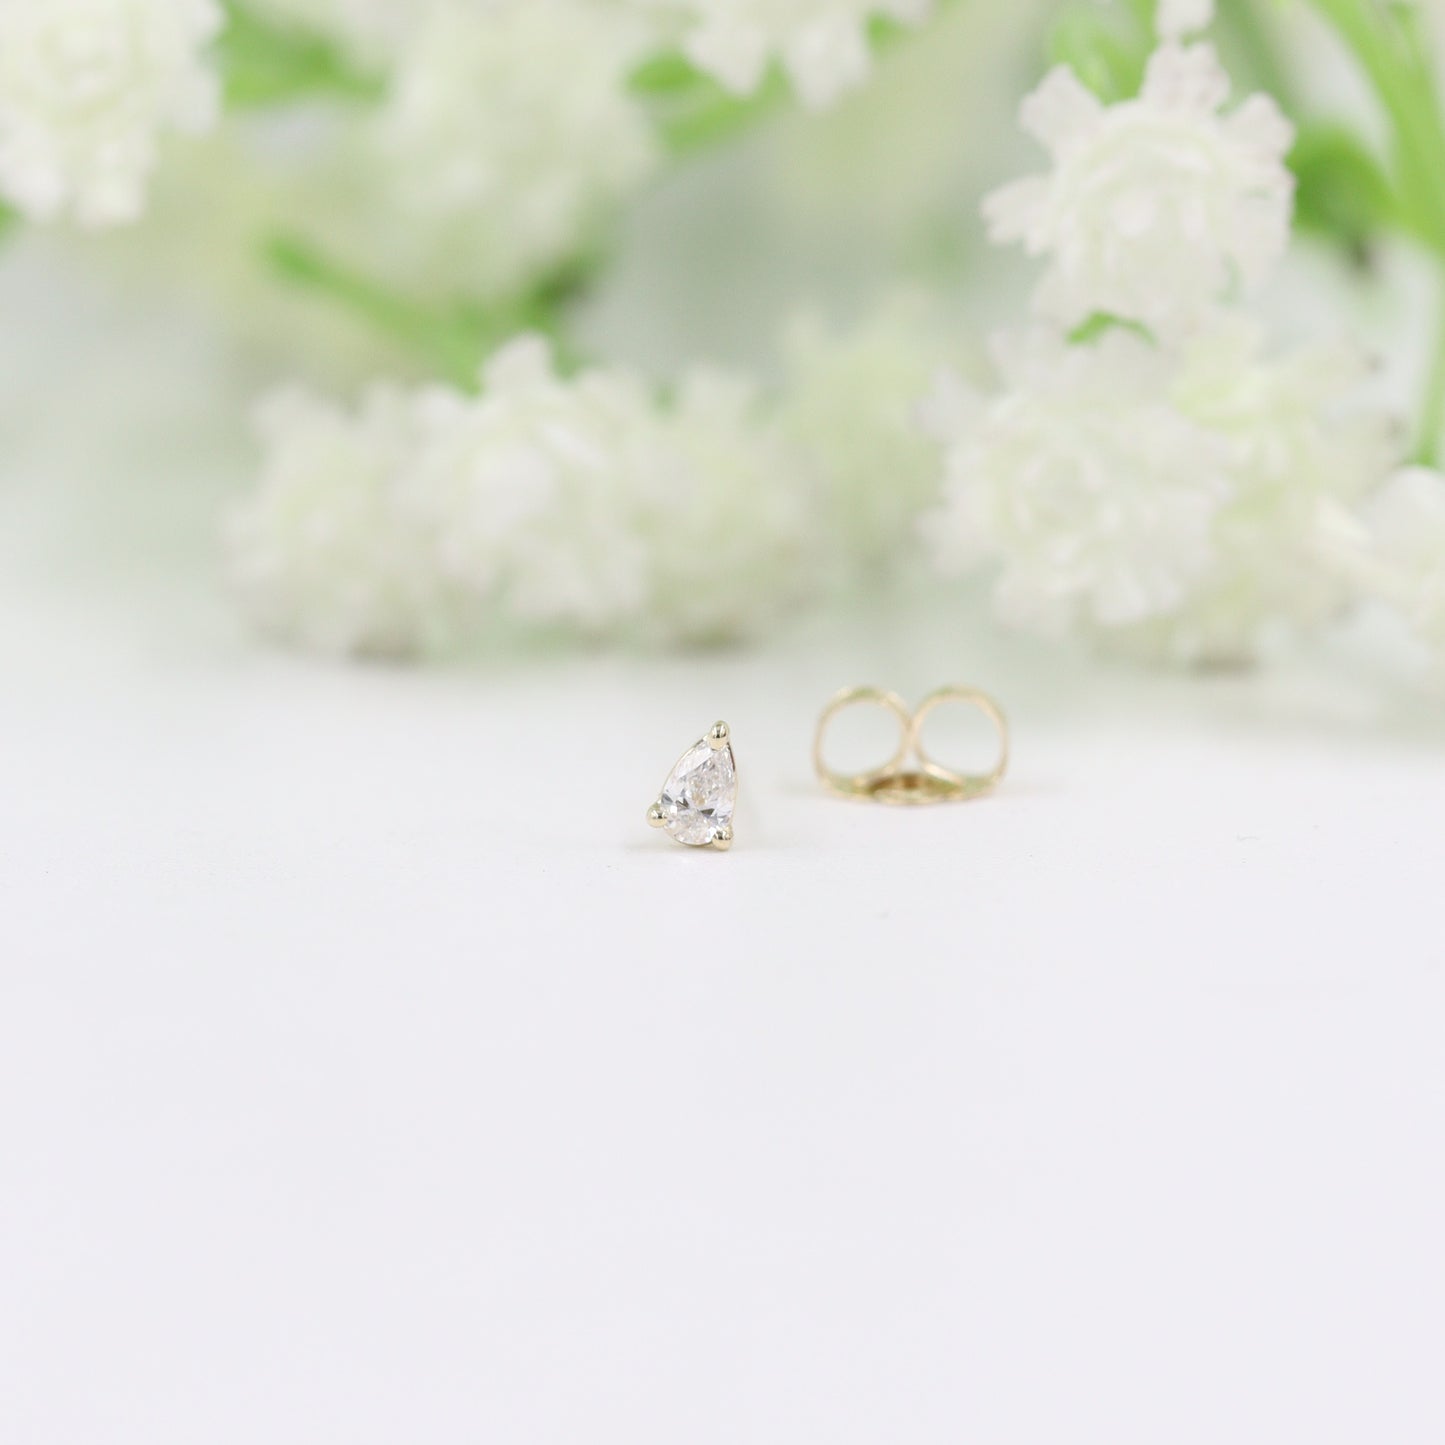 Solitaire Natural Pear Diamond Earring/Three Prong Set Pear Diamond Earrings/Solitaire Stud Earrings/Dainty Simple Earrings/Gifts for her